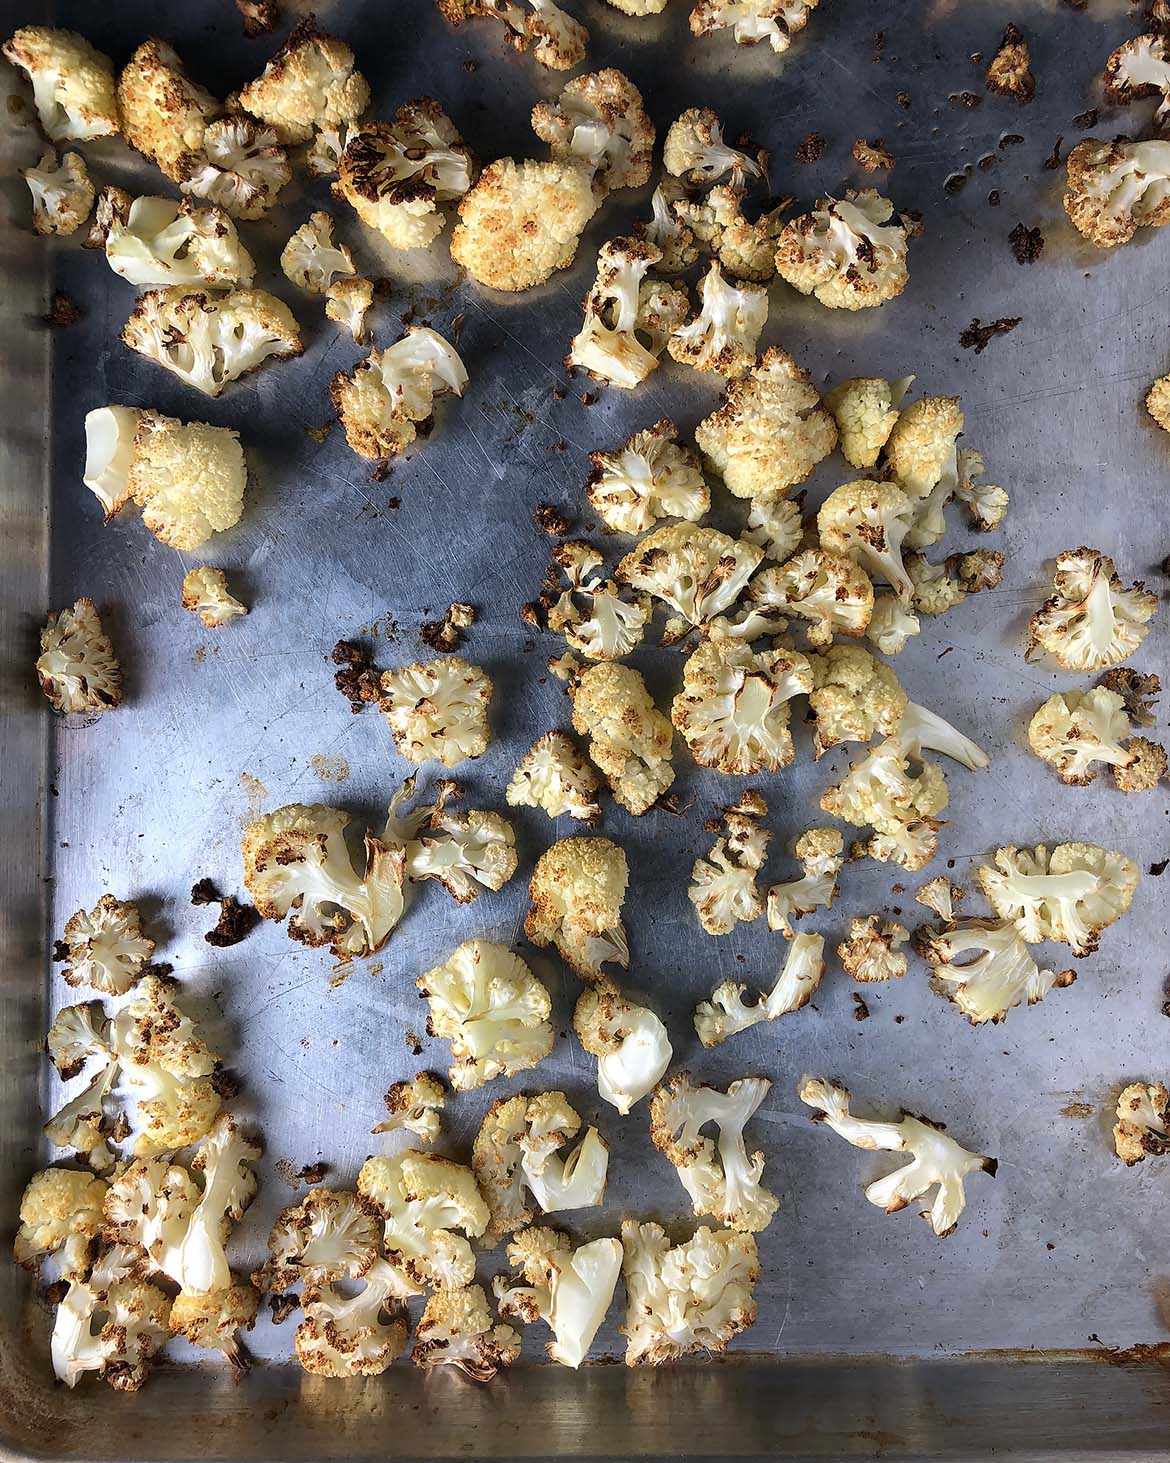 Topdown view of roasted cauliflower. Cauliflower is golden brown and the edges are dark brown and crispy.